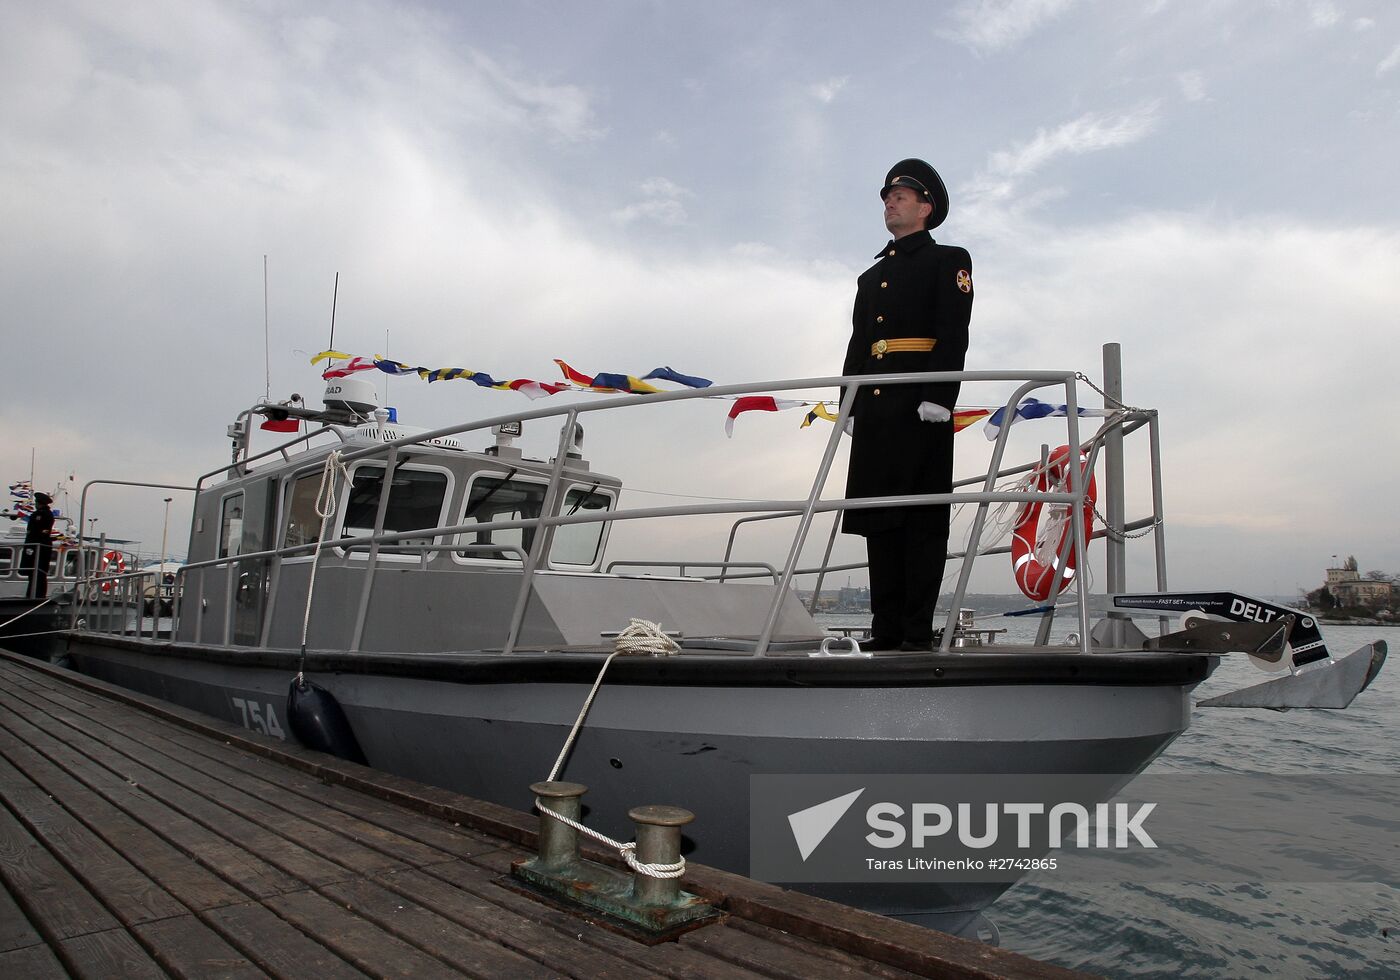 Boats officially join the fleet of Russia's Interior Ministry maritime units